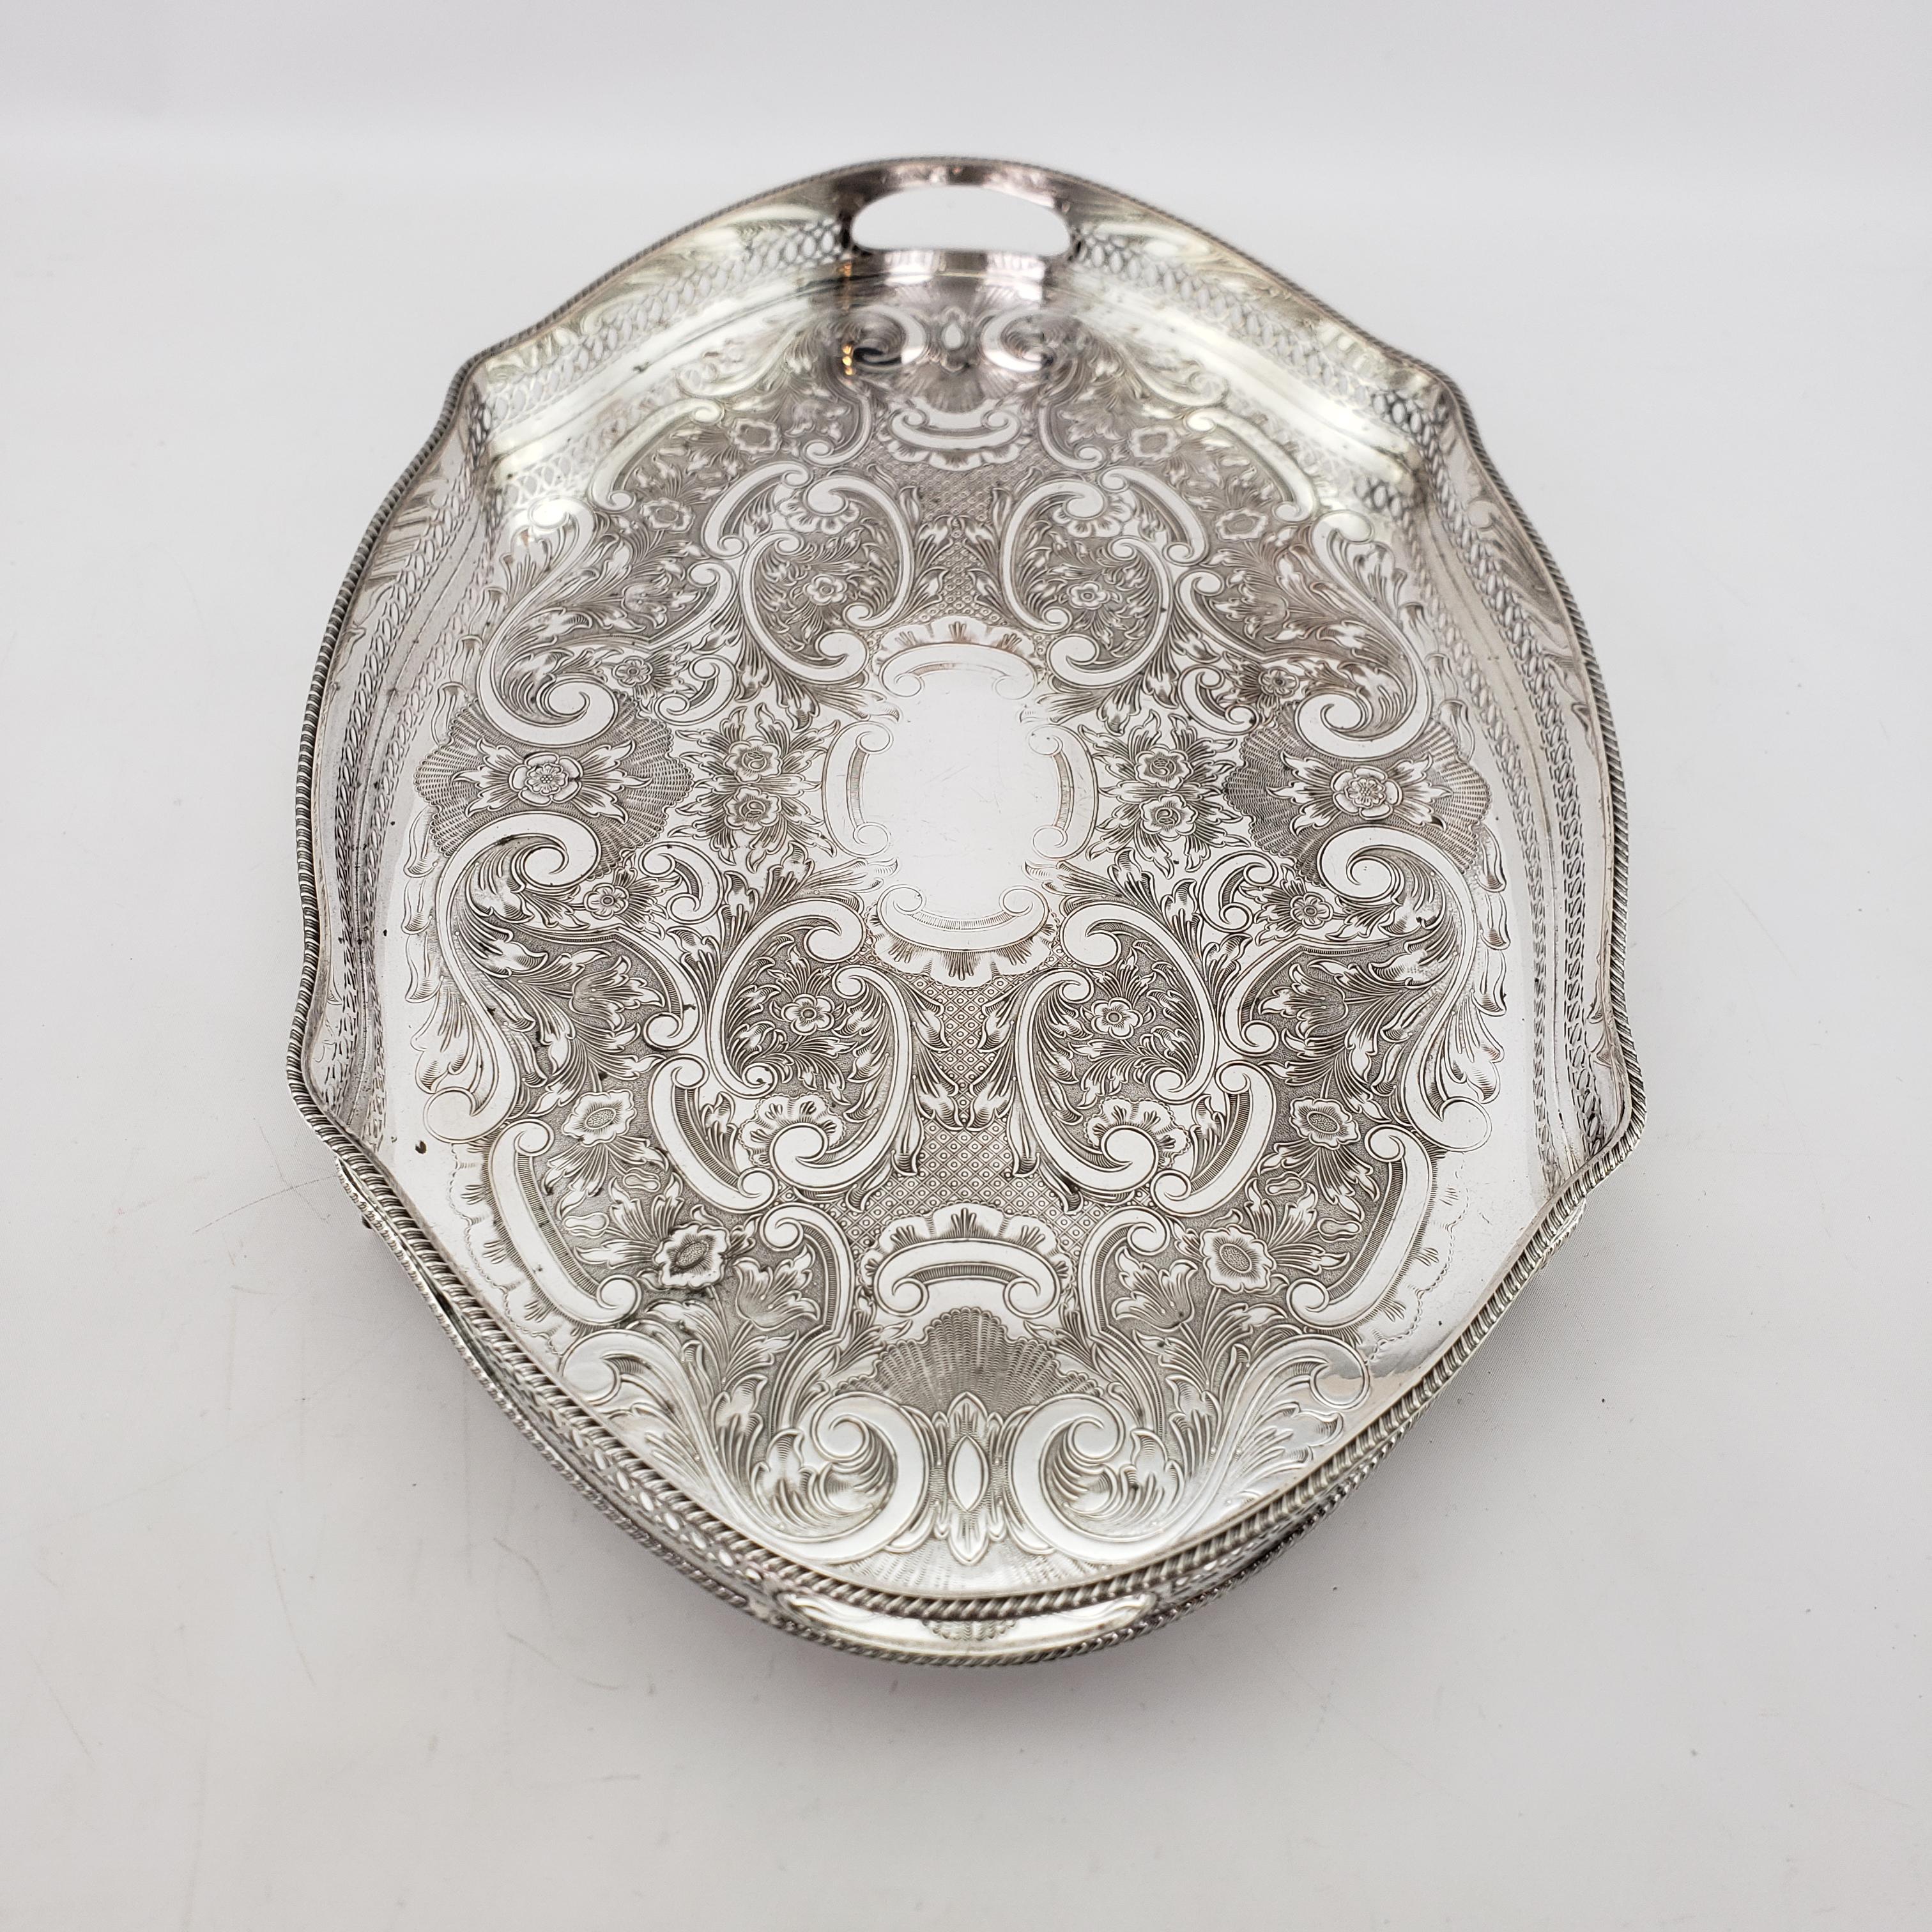 Antique Silver Plated Footed Gallery Serving Tray with Ornate Floral Engraving 1